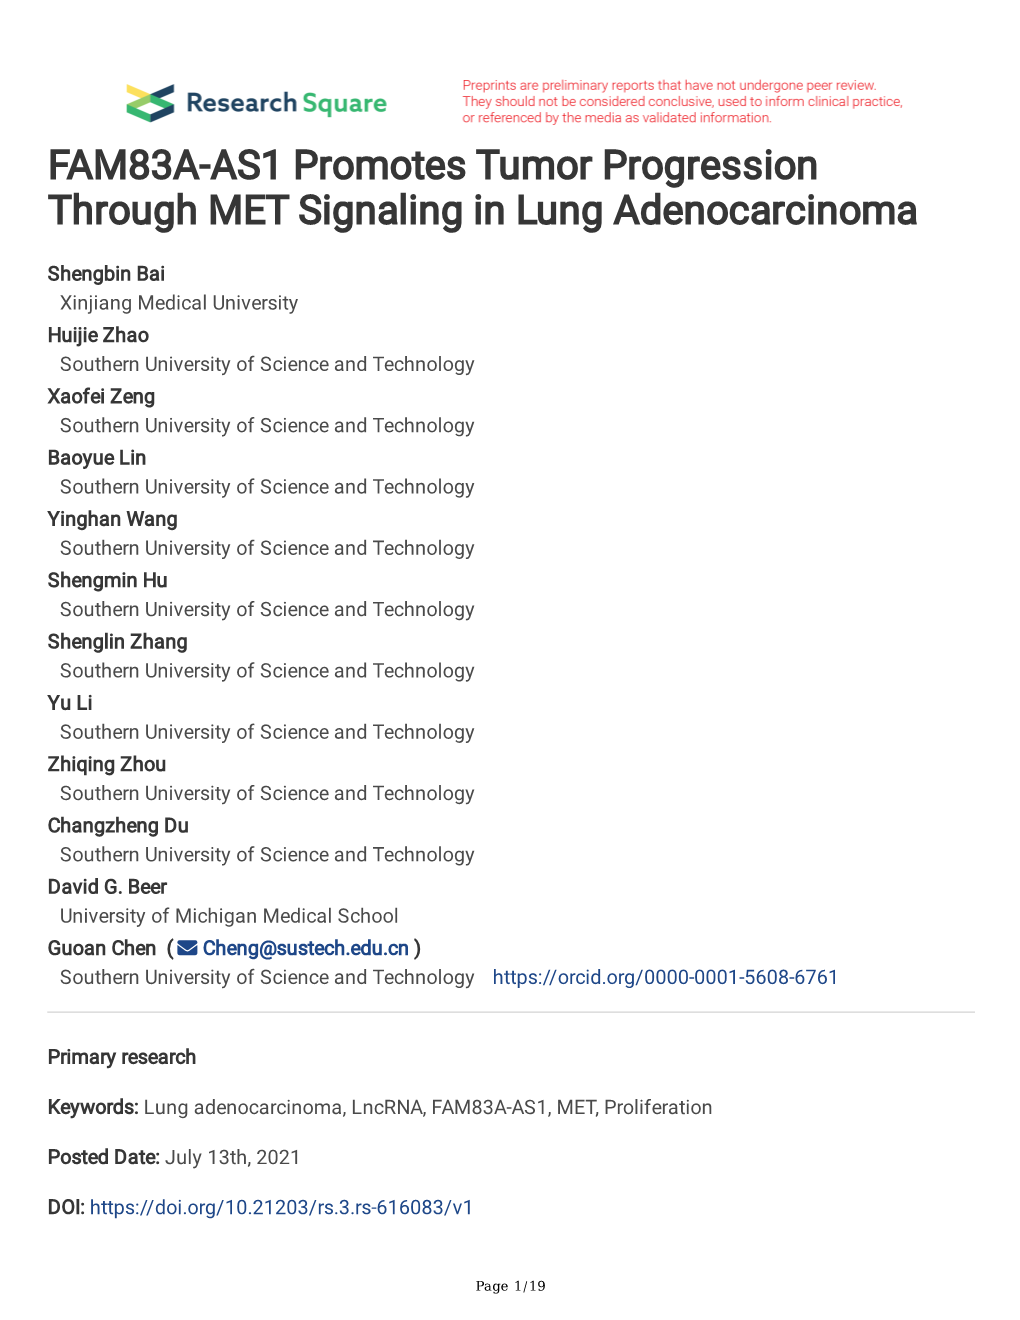 FAM83A-AS1 Promotes Tumor Progression Through MET Signaling in Lung Adenocarcinoma